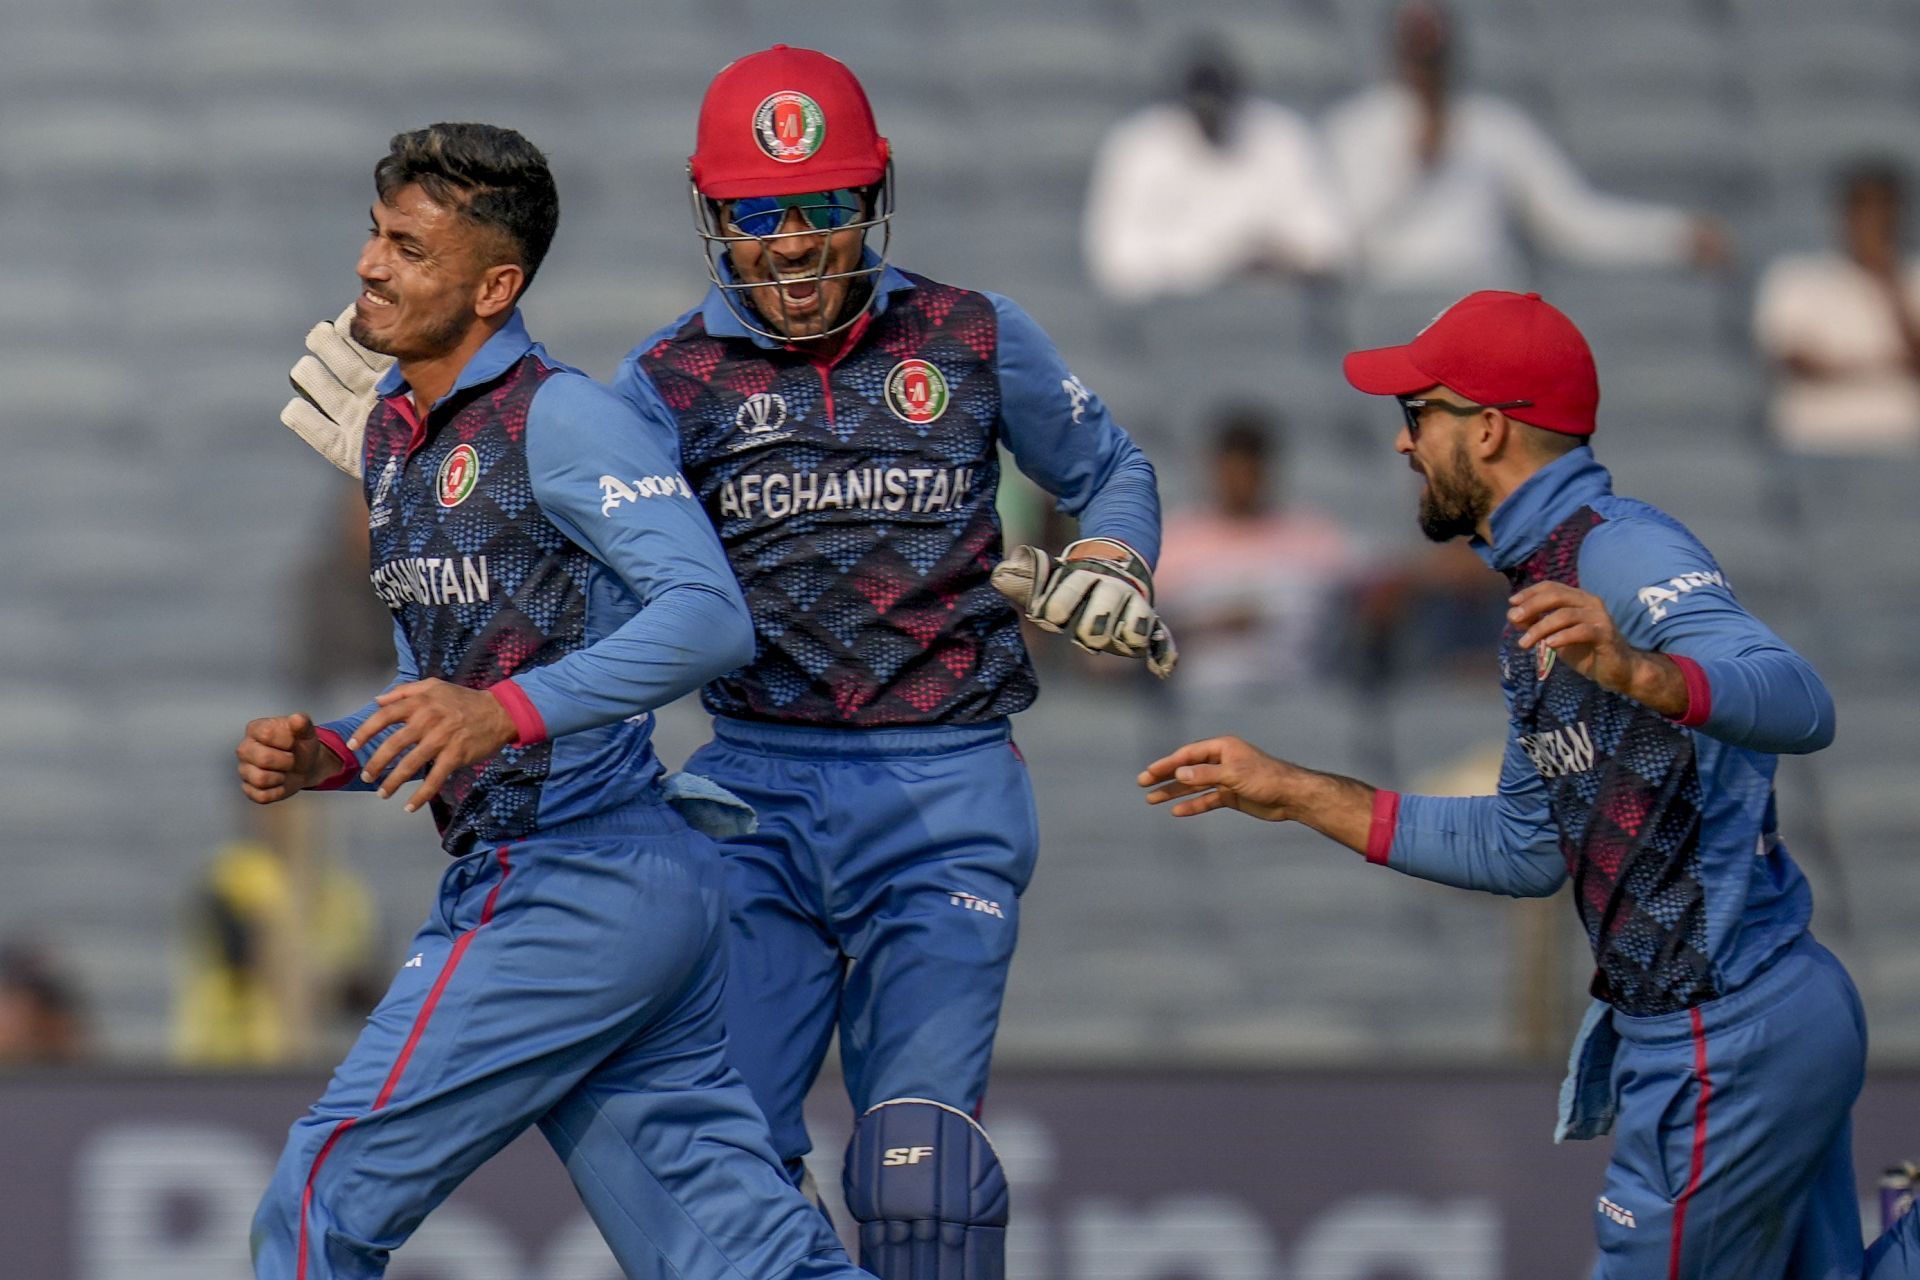 The Afghanistan spinners have picked up 25 wickets between them in the ongoing World Cup. [P/C: AP]